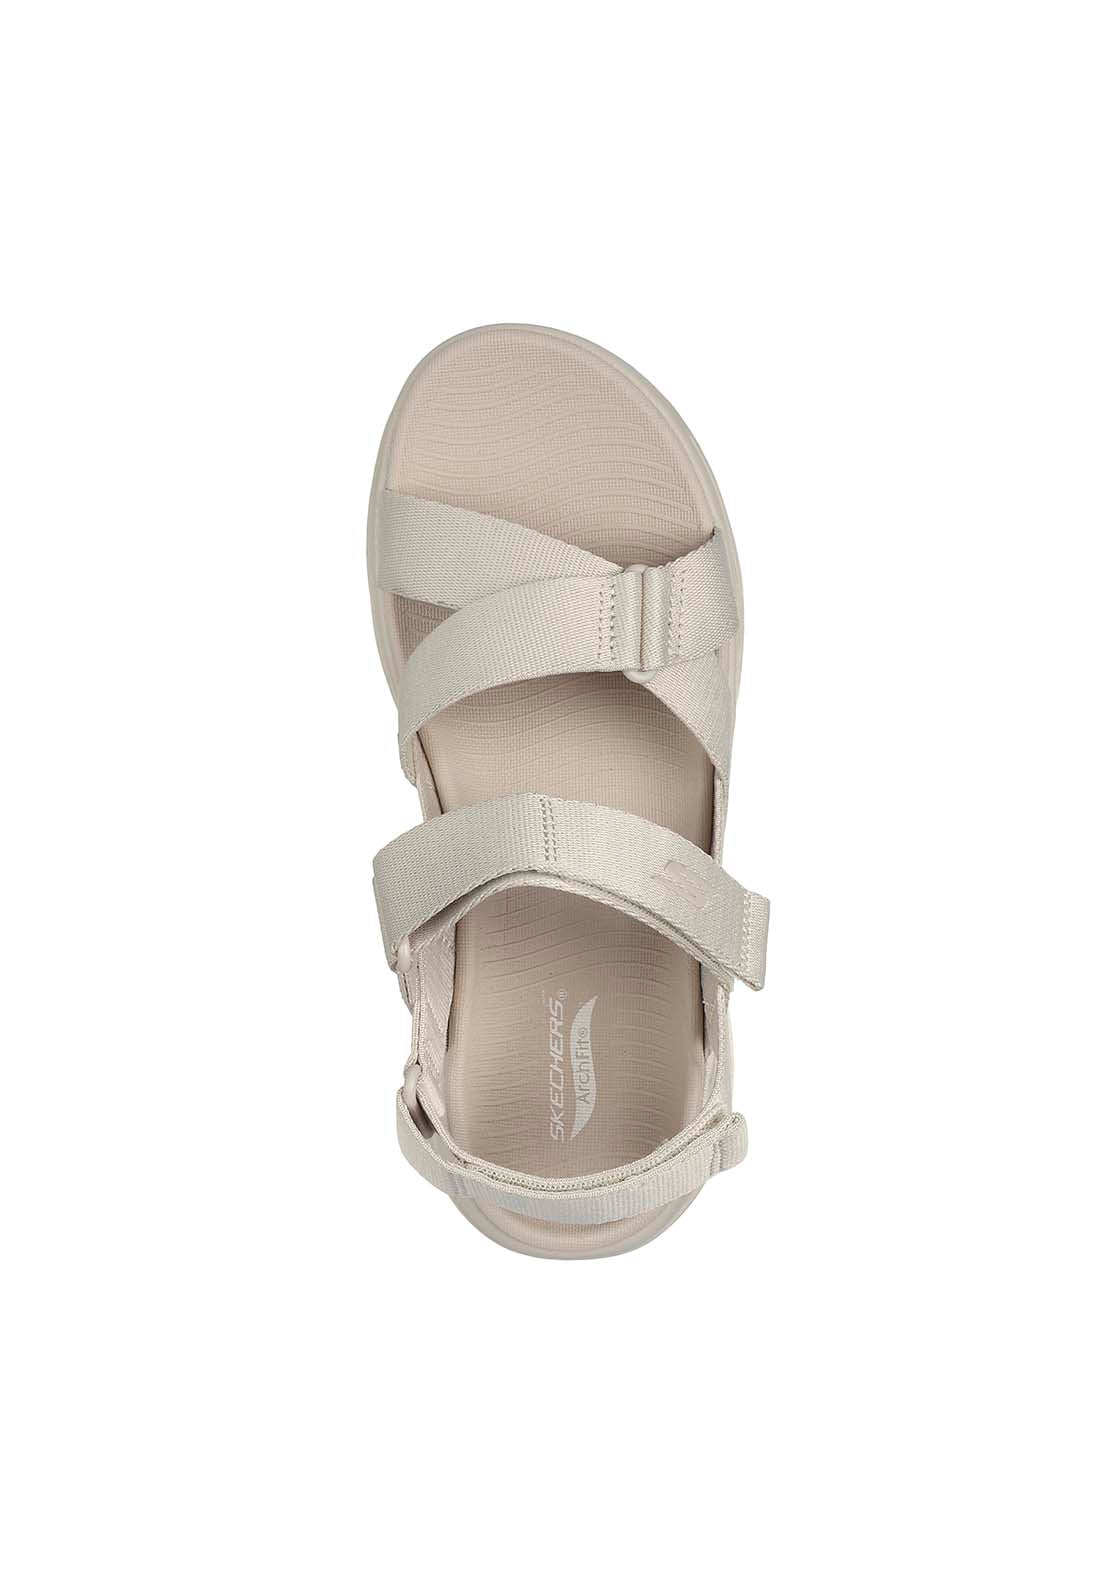 Skechers Go Walk Arch Fit Sandal 3 Shaws Department Stores